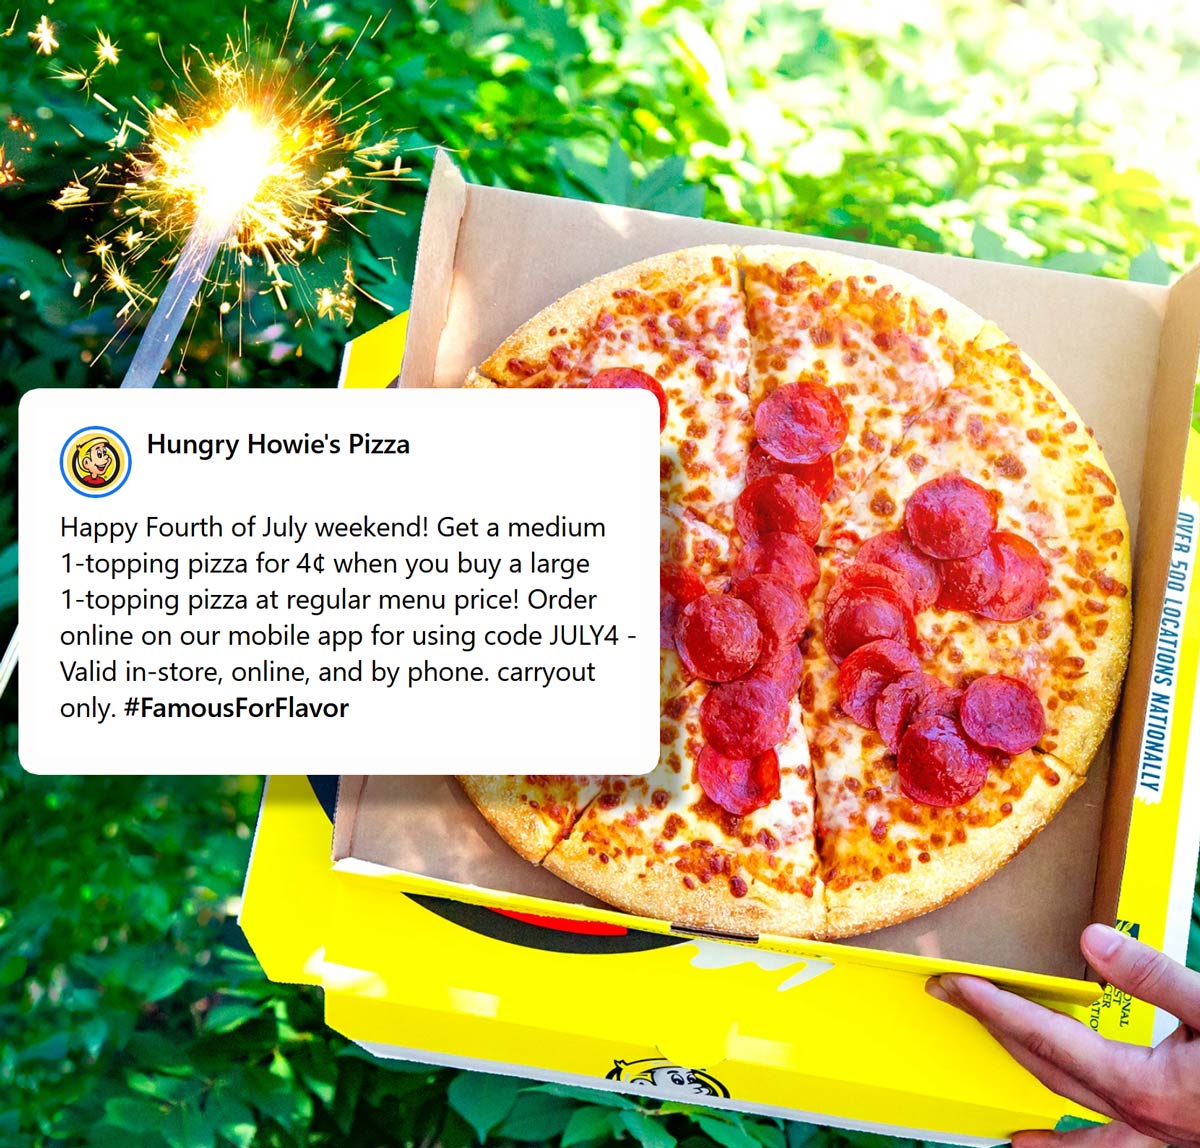 Hungry Howies restaurants Coupon  Second pizza .04 cents today at Hungry Howies via promo code JULY4 #hungryhowies 